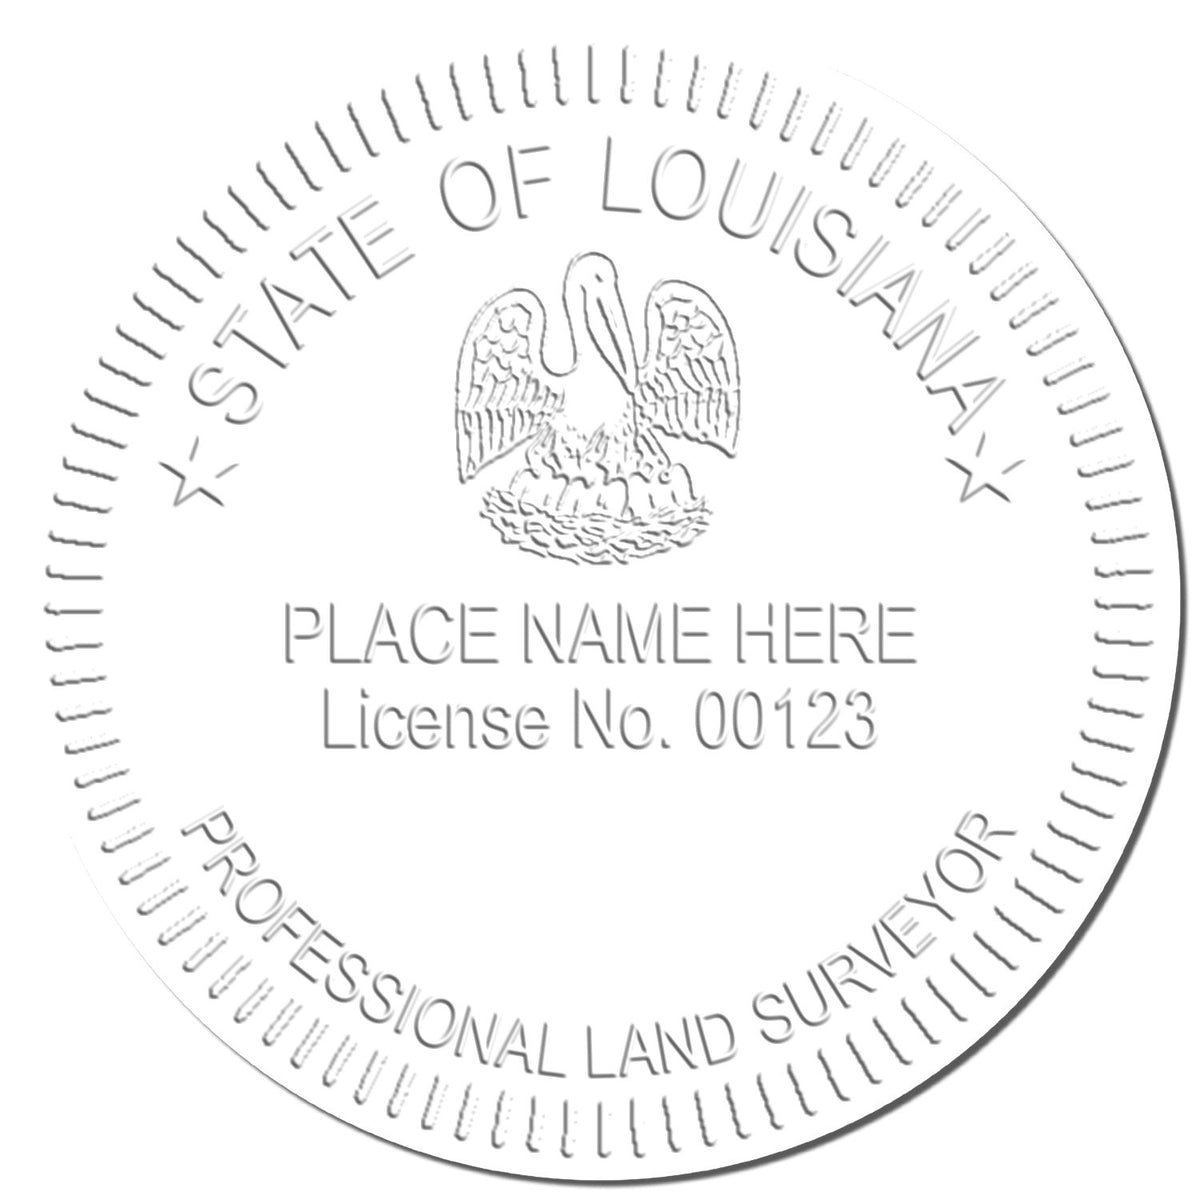 This paper is stamped with a sample imprint of the Extended Long Reach Louisiana Surveyor Embosser, signifying its quality and reliability.